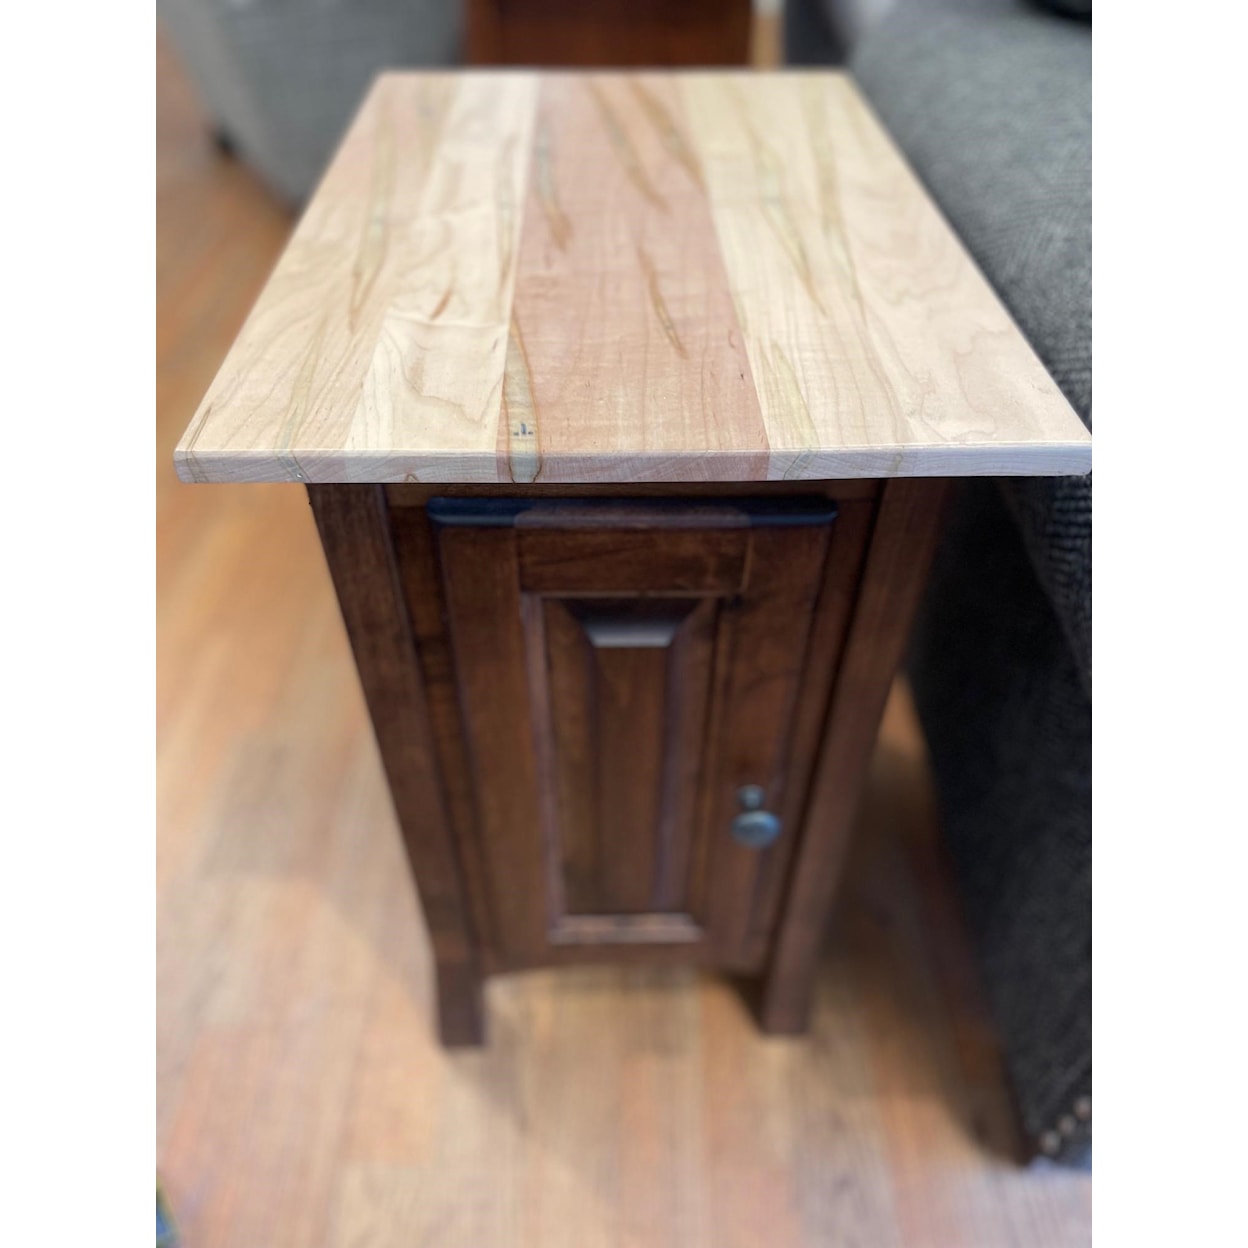 Wooden Design URB Chairside Cabinet Table